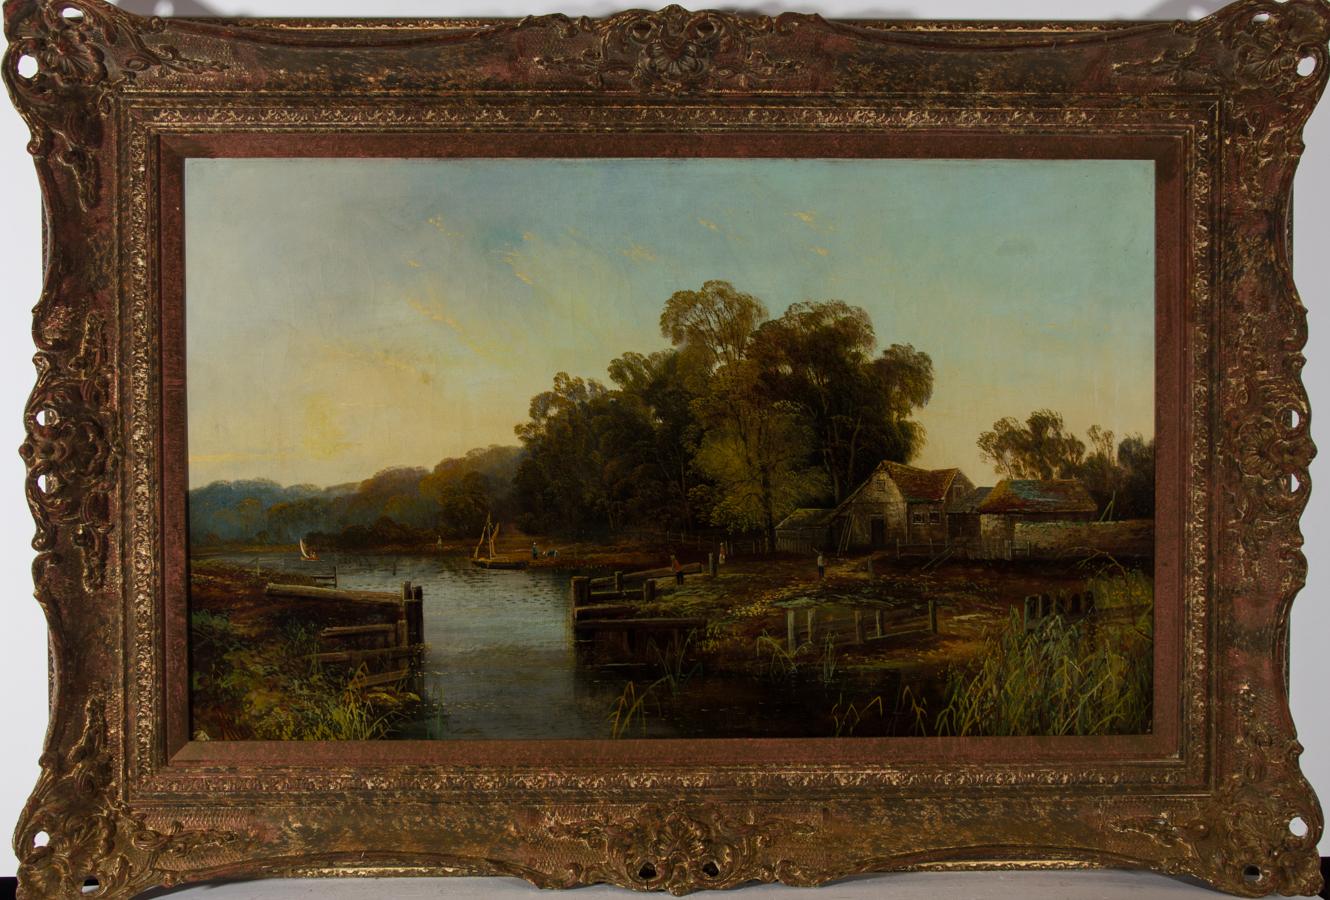 Sulis Fine Art is proud to present this very fine landscape in oil, by the British listed artist Robert Weir Allan RWS (1851-1942). Allan has produced this handsome river scene in an updated Picturesque style, characteristic of artistic trends at